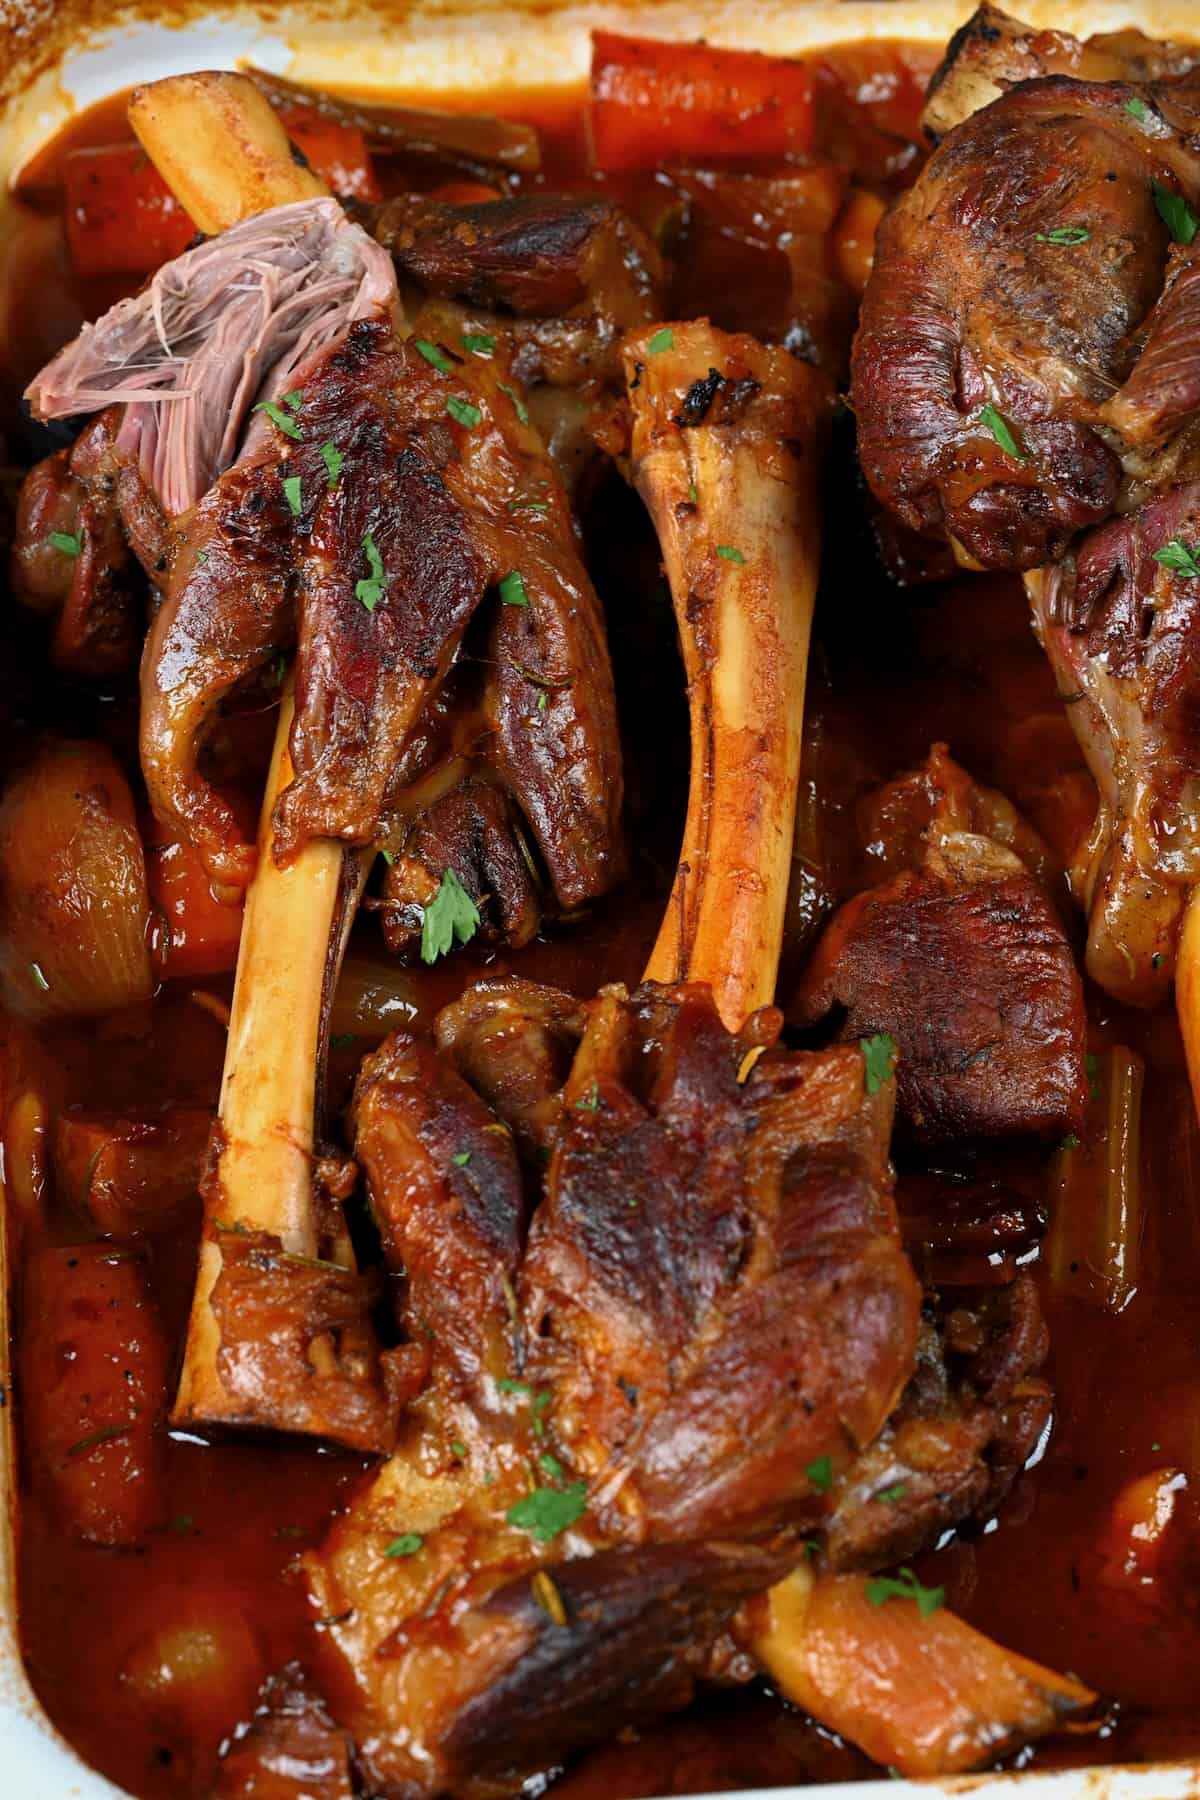 Braised lamb shanks in a tray